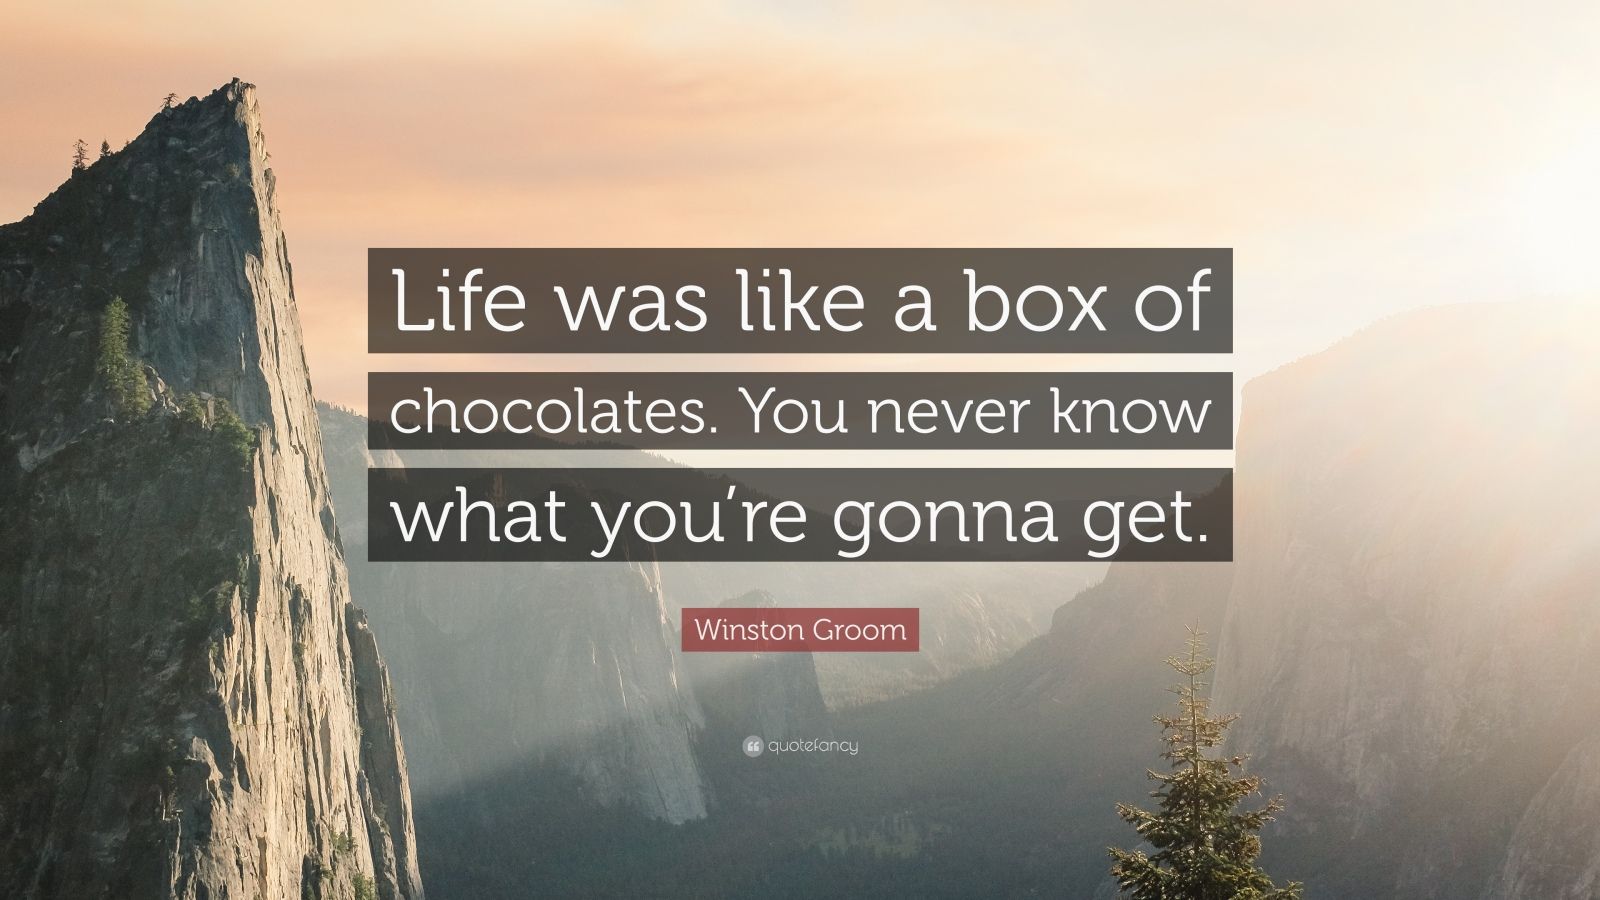 Winston Groom Quote: "Life was like a box of chocolates. You never know what you're gonna get ...